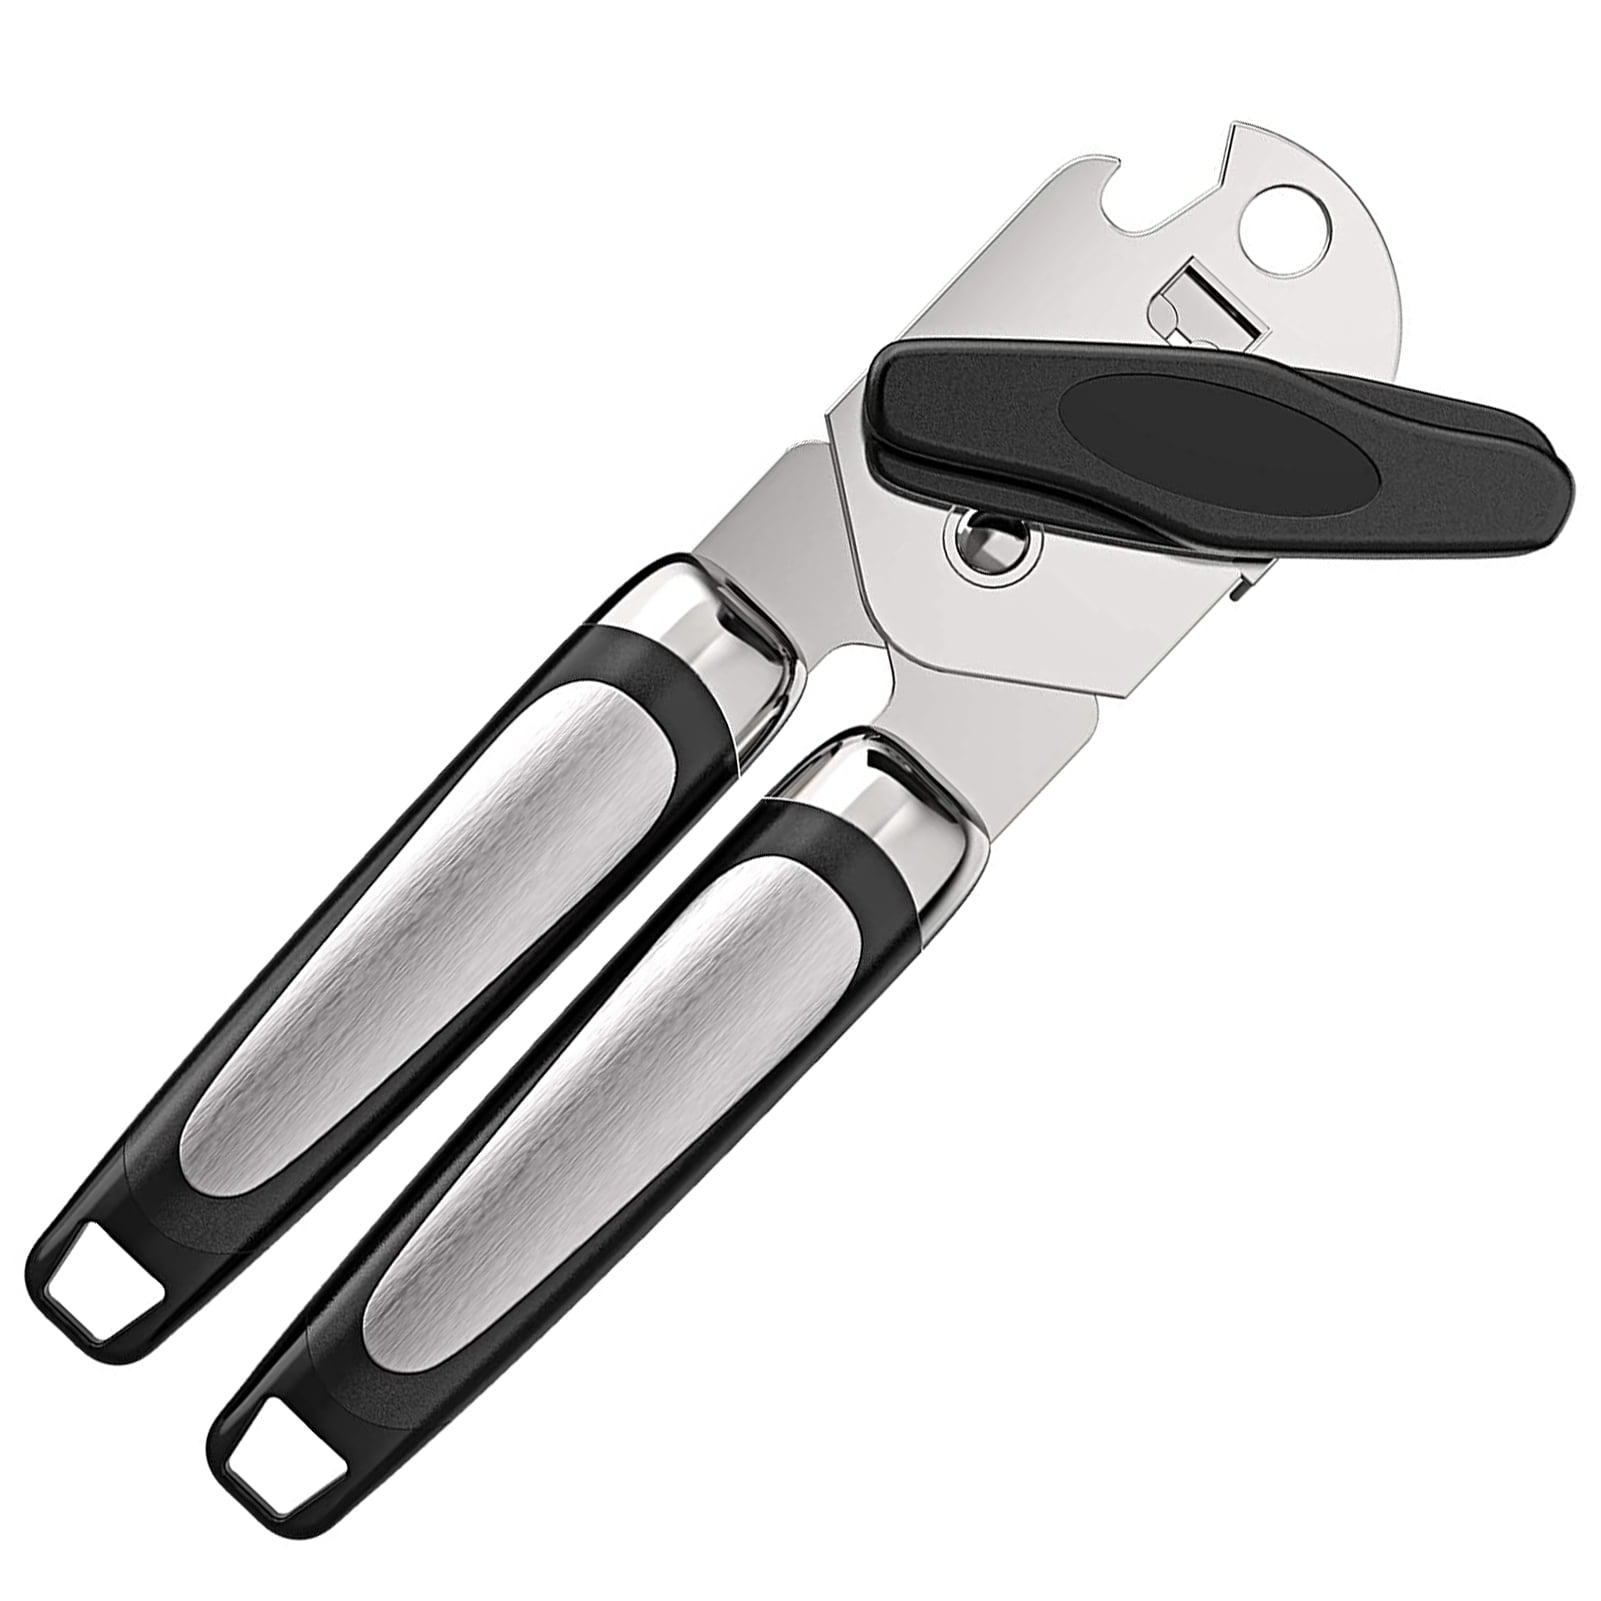 Can Opener Stainless Steel Can Bottle Opener Smooth Edge Manual Can Opener Heavy Duty Kitchen Hand Can Openers Comfort good Grip Tin/Jar/Bottle/Cans Opener Black